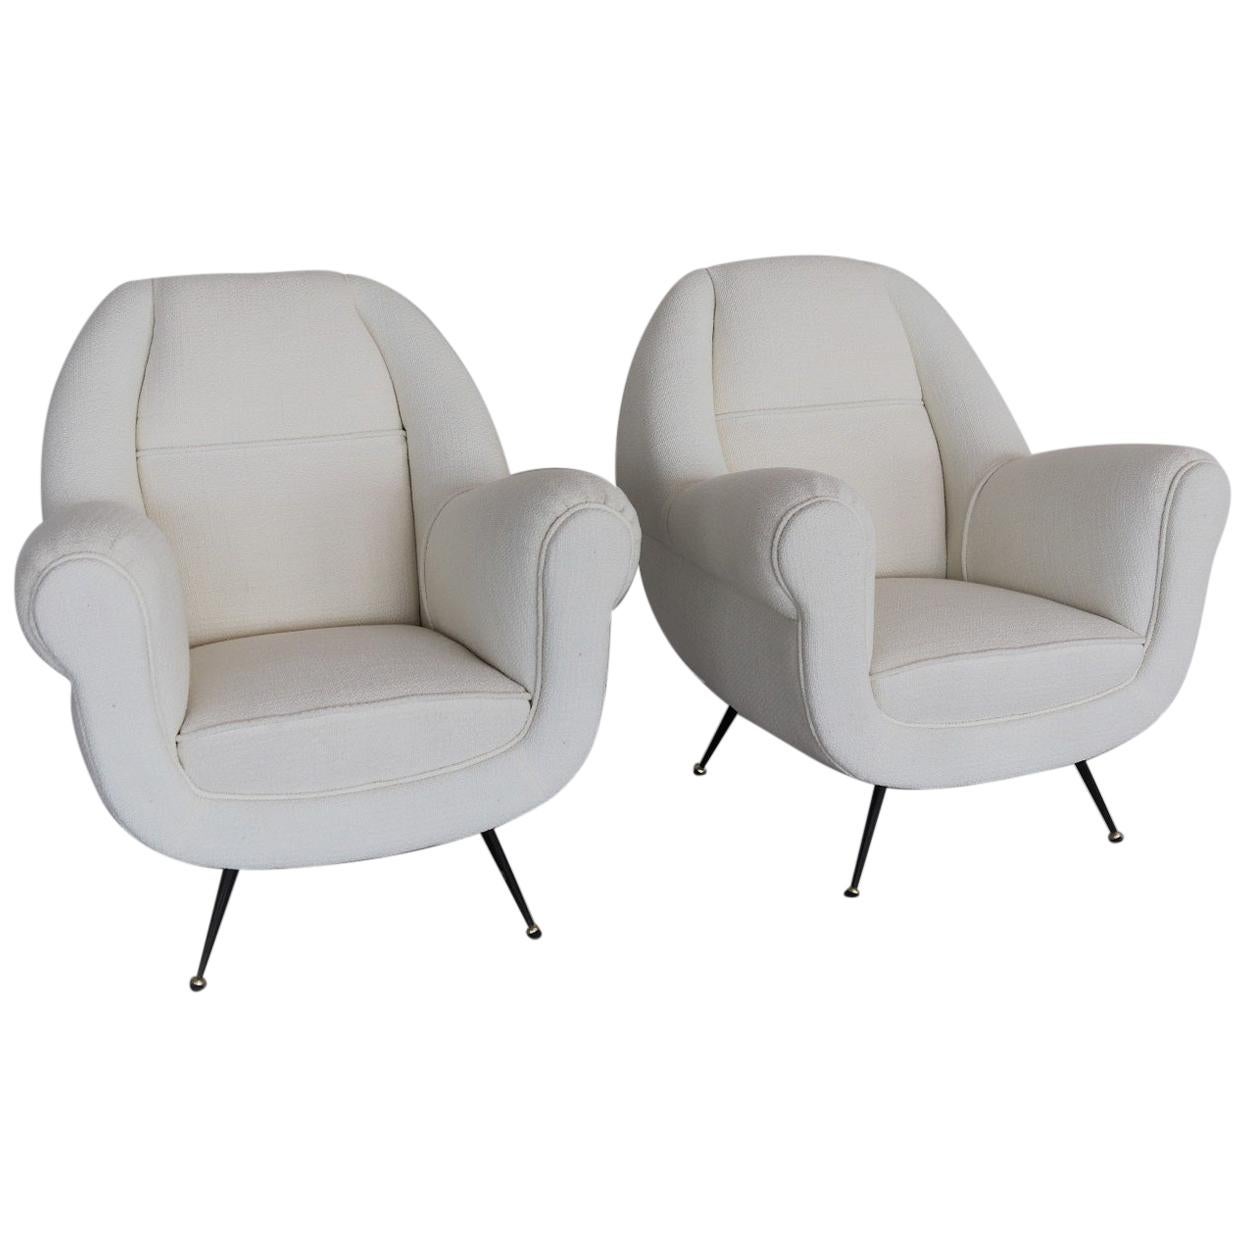 Italian Midcentury Armchairs in White Upholstery and Brass Stiletto Feet, 1960s For Sale